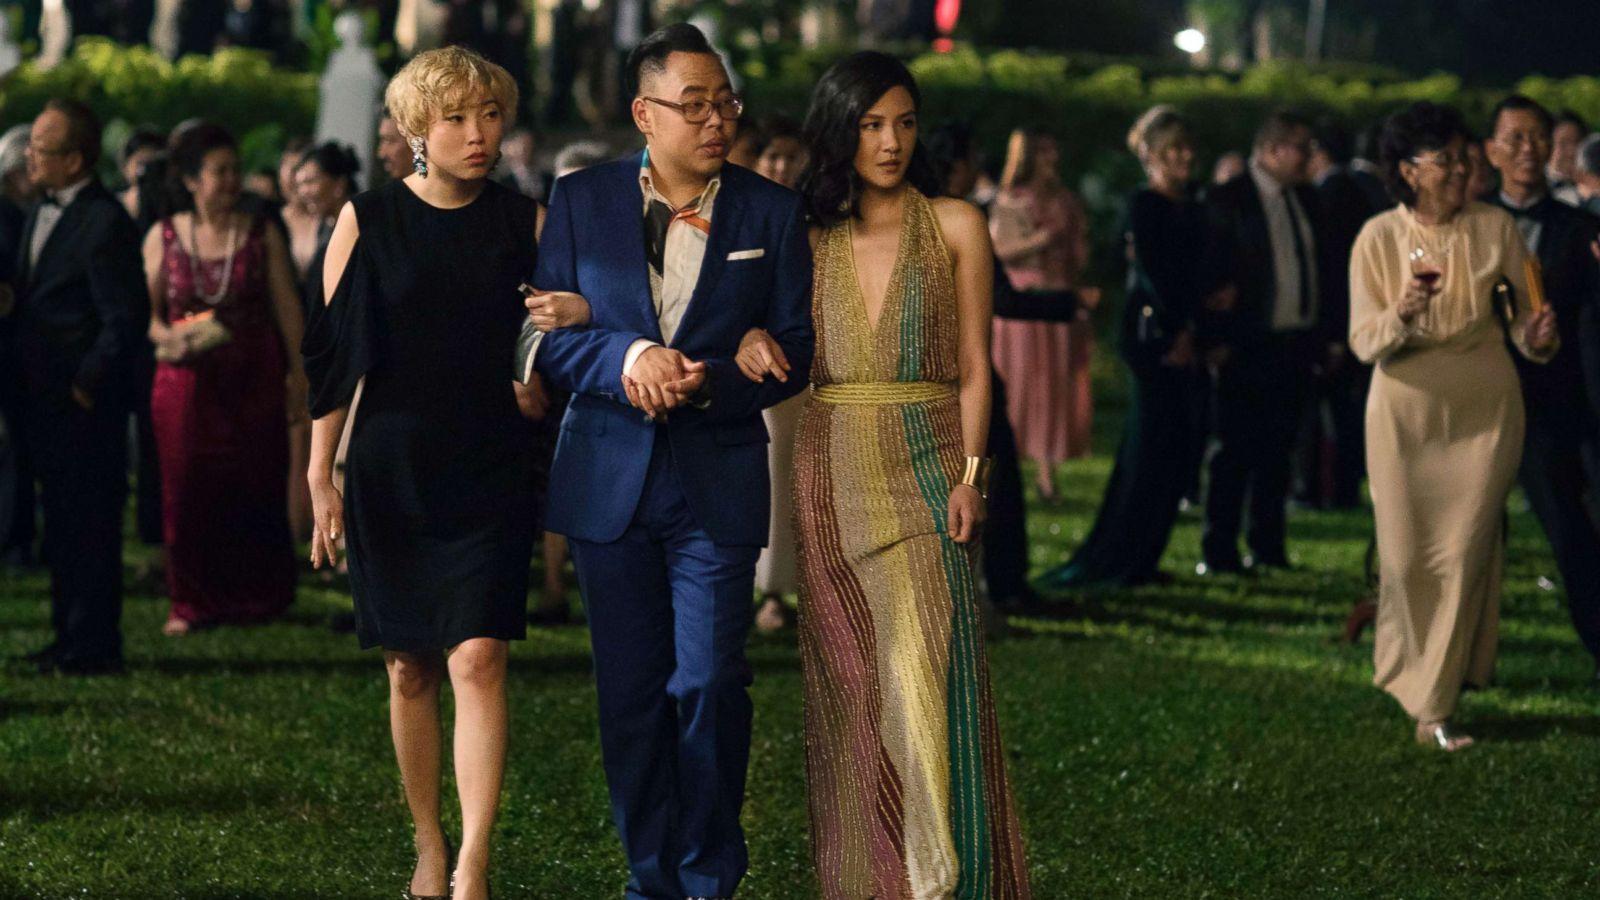 Crazy Rich Asians': 5 things to know about the new film